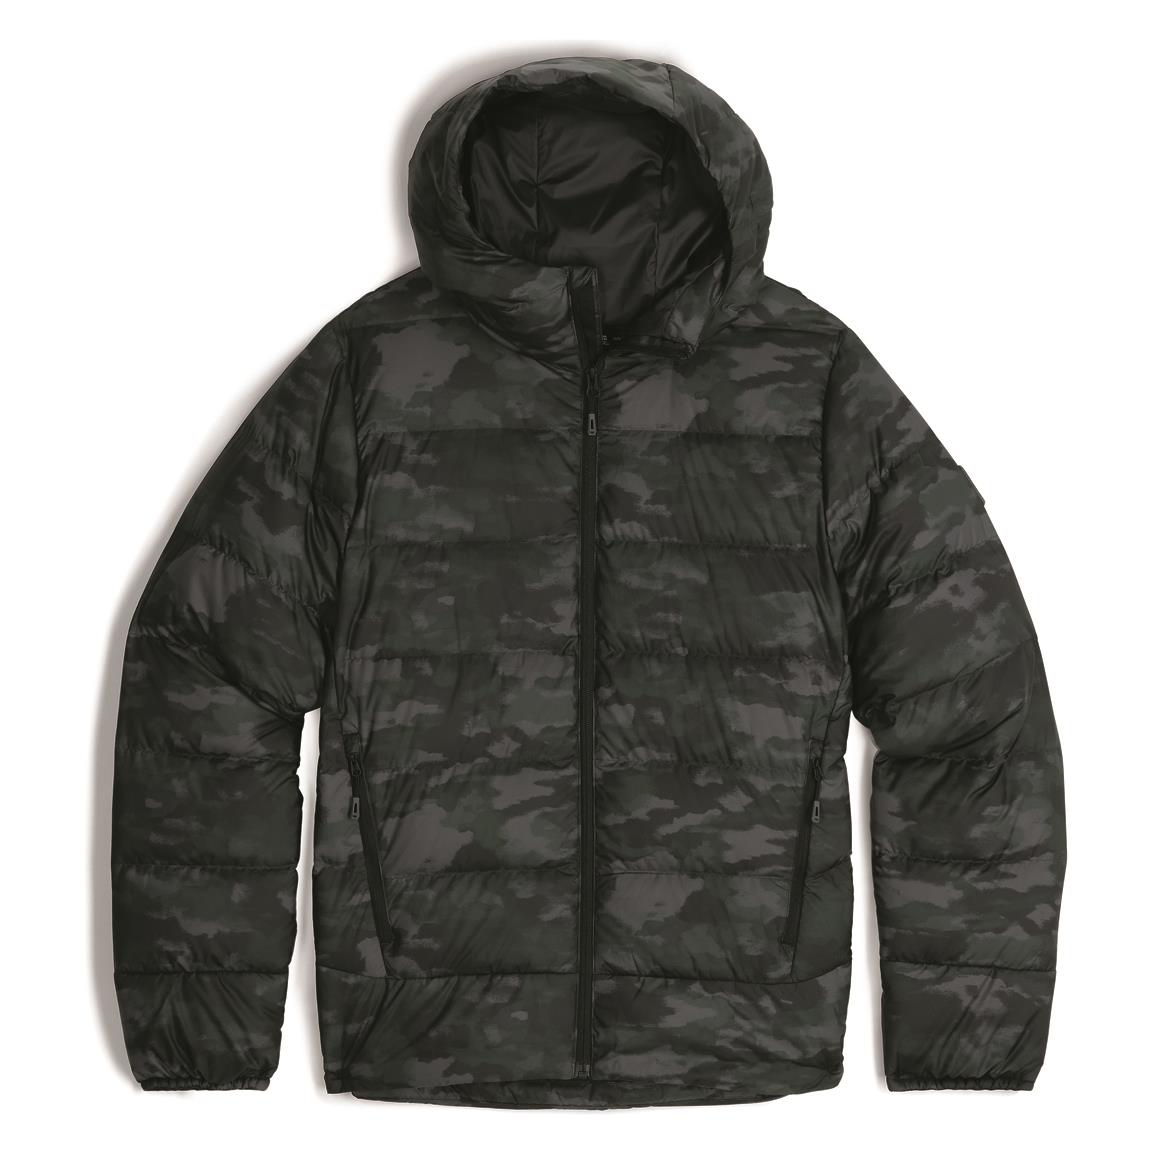 Outdoor Research Men's Coldfront Down Insulated Hooded Jacket, Grove Camo